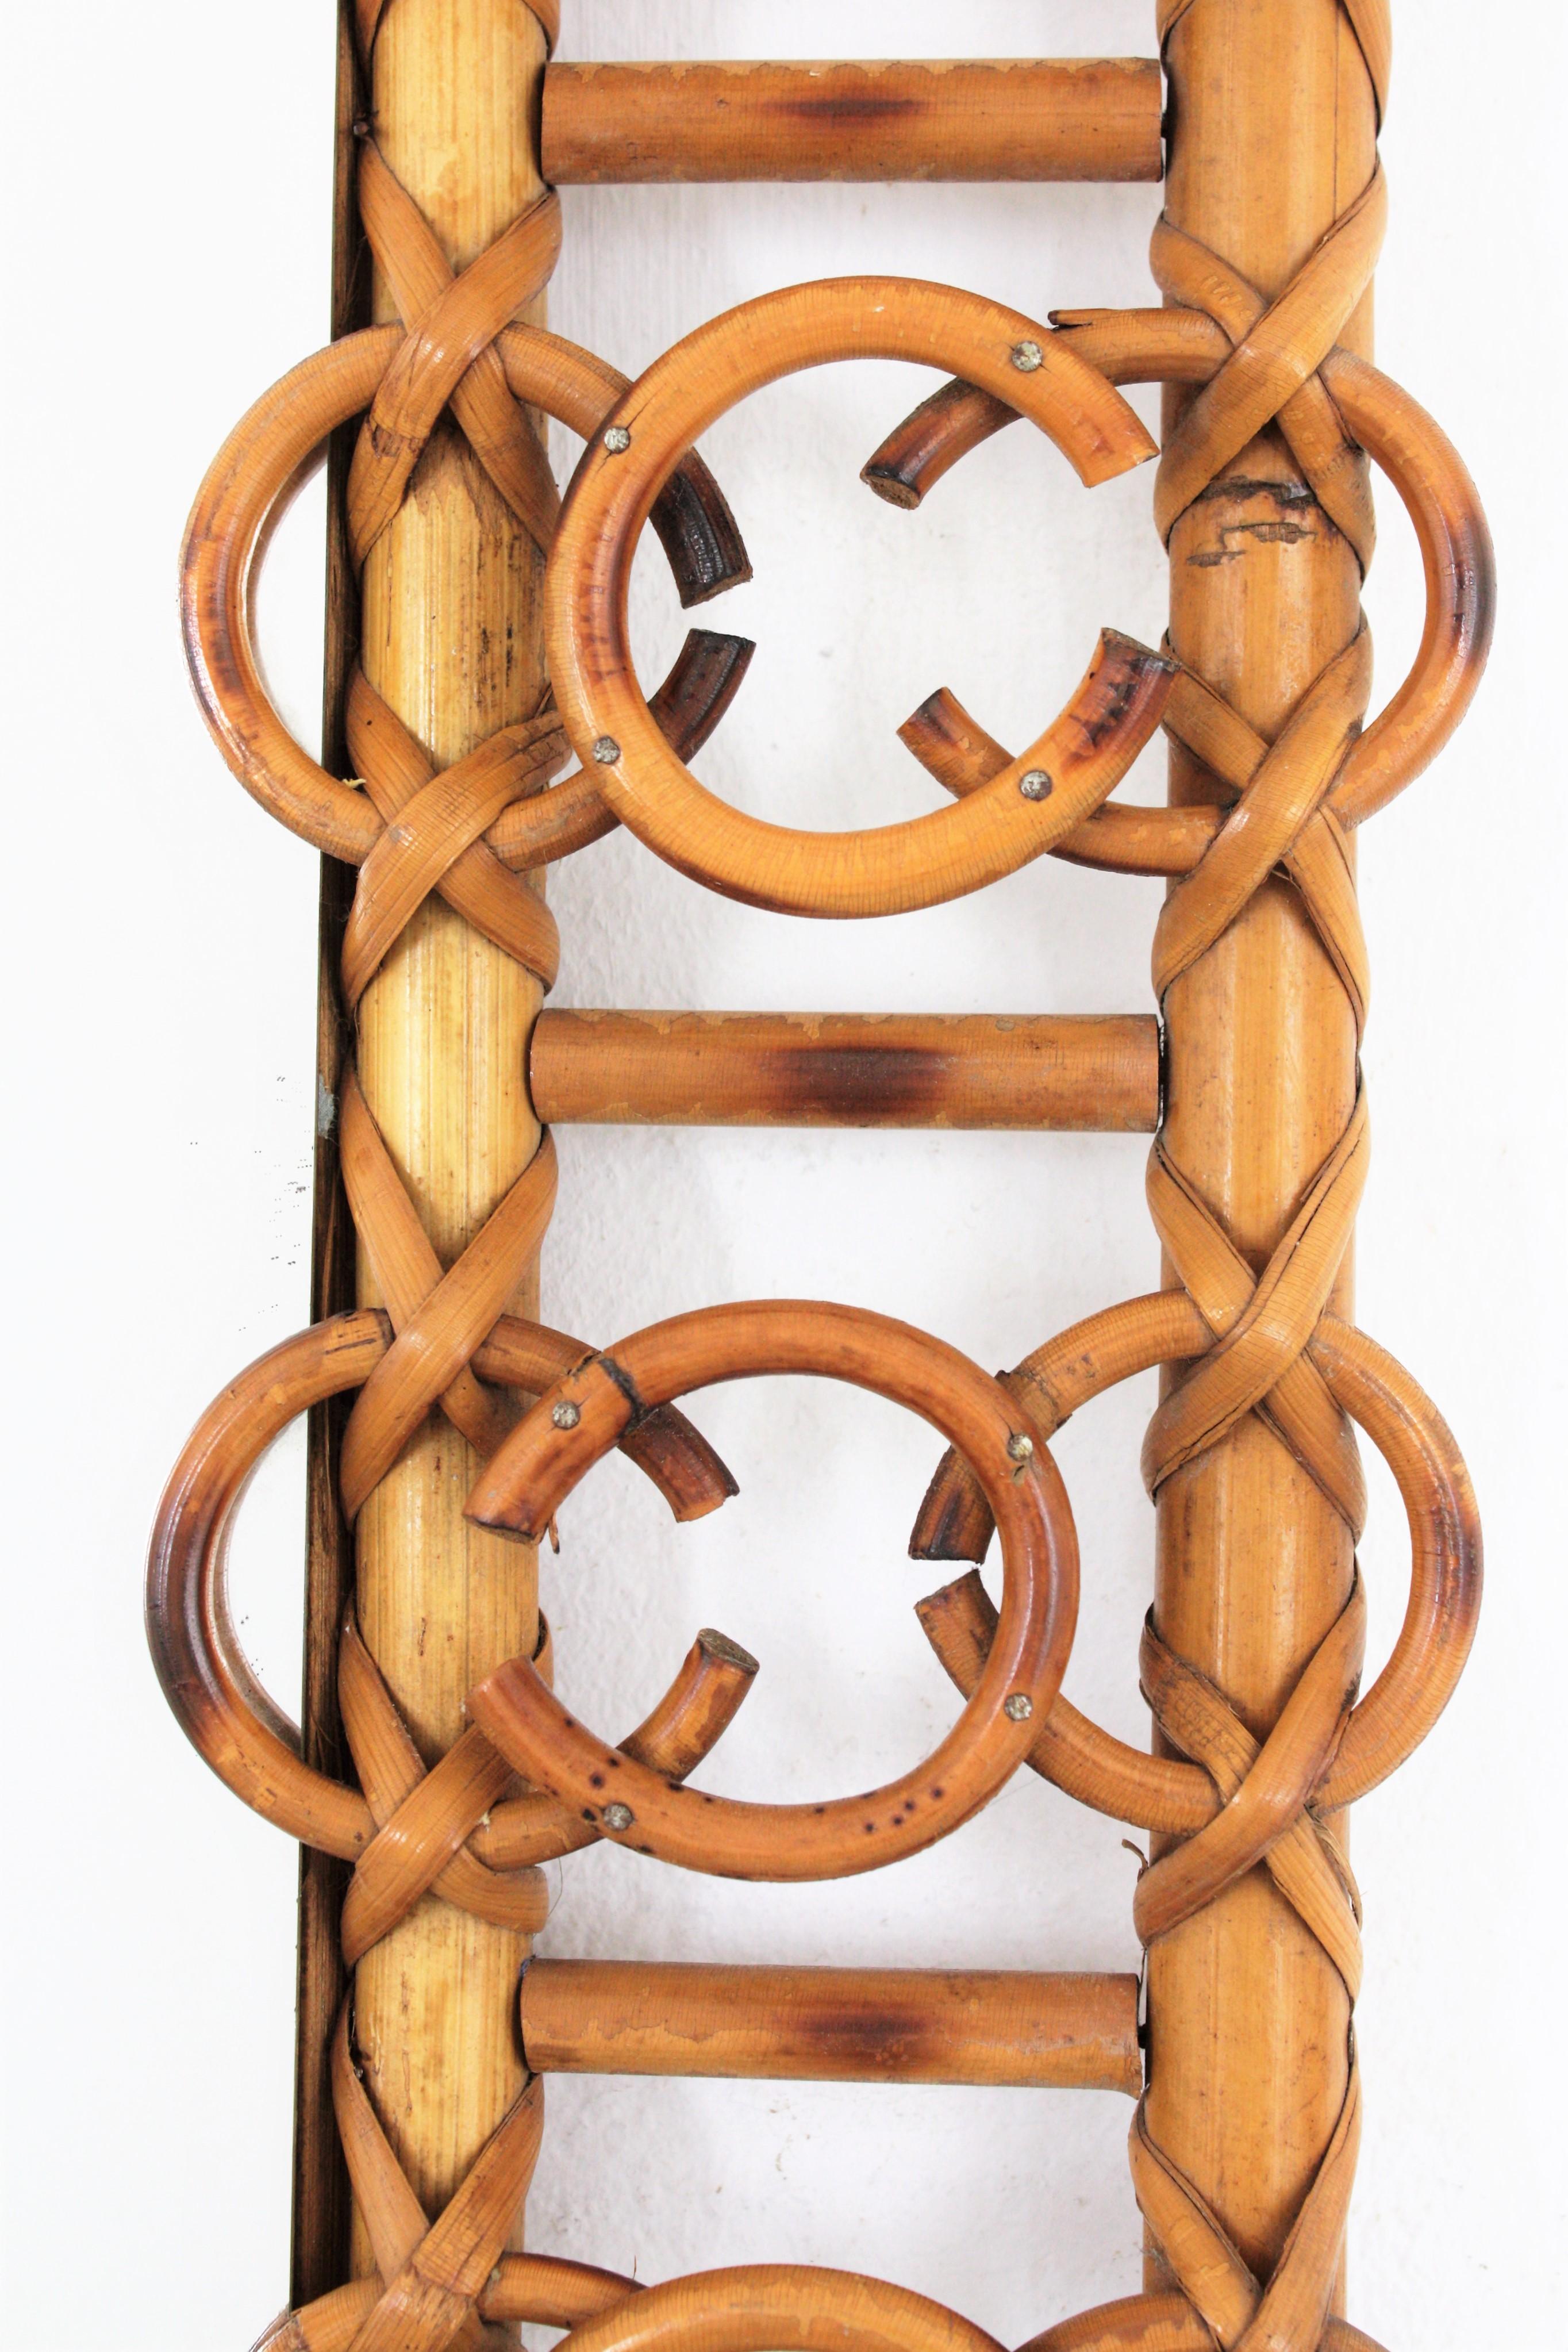 1950s French Riviera rattan rectangular mirror with rings accents on the frame.
Unusual handcrafted rattan rectangular mirror accented by circles decorations.
This stylish mirror has all the taste of the French Mediterranean coast style. Highly